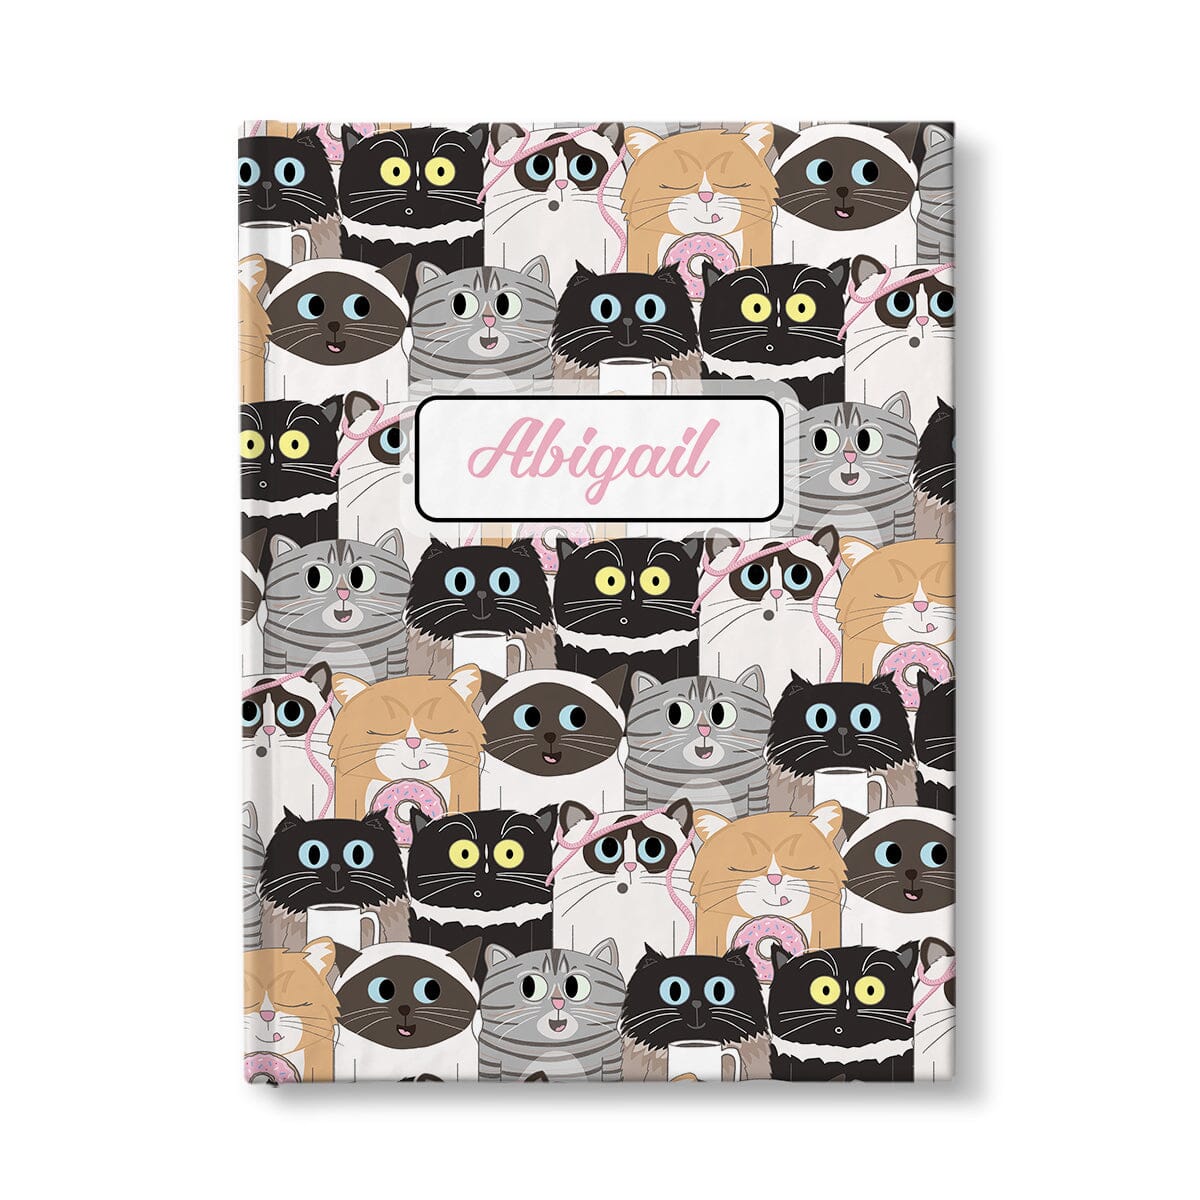 Personalized Cute Cat Stack Pattern Journal at Artistically Invited. Front side of journal.